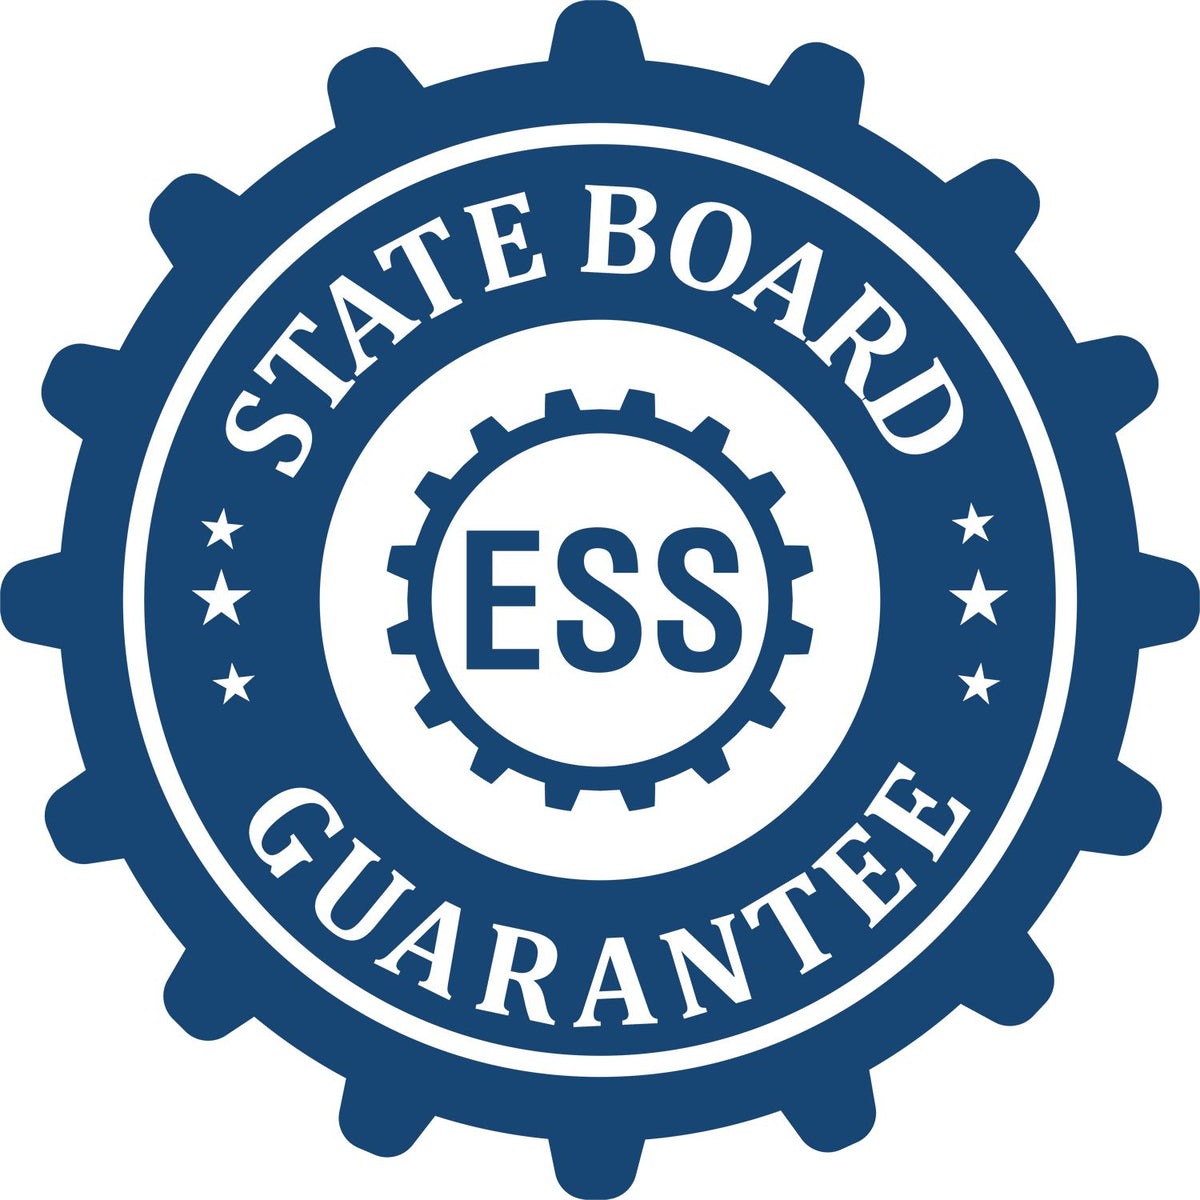 An emblem in a gear shape illustrating a state board guarantee for the State of Florida Long Reach Architectural Embossing Seal product.